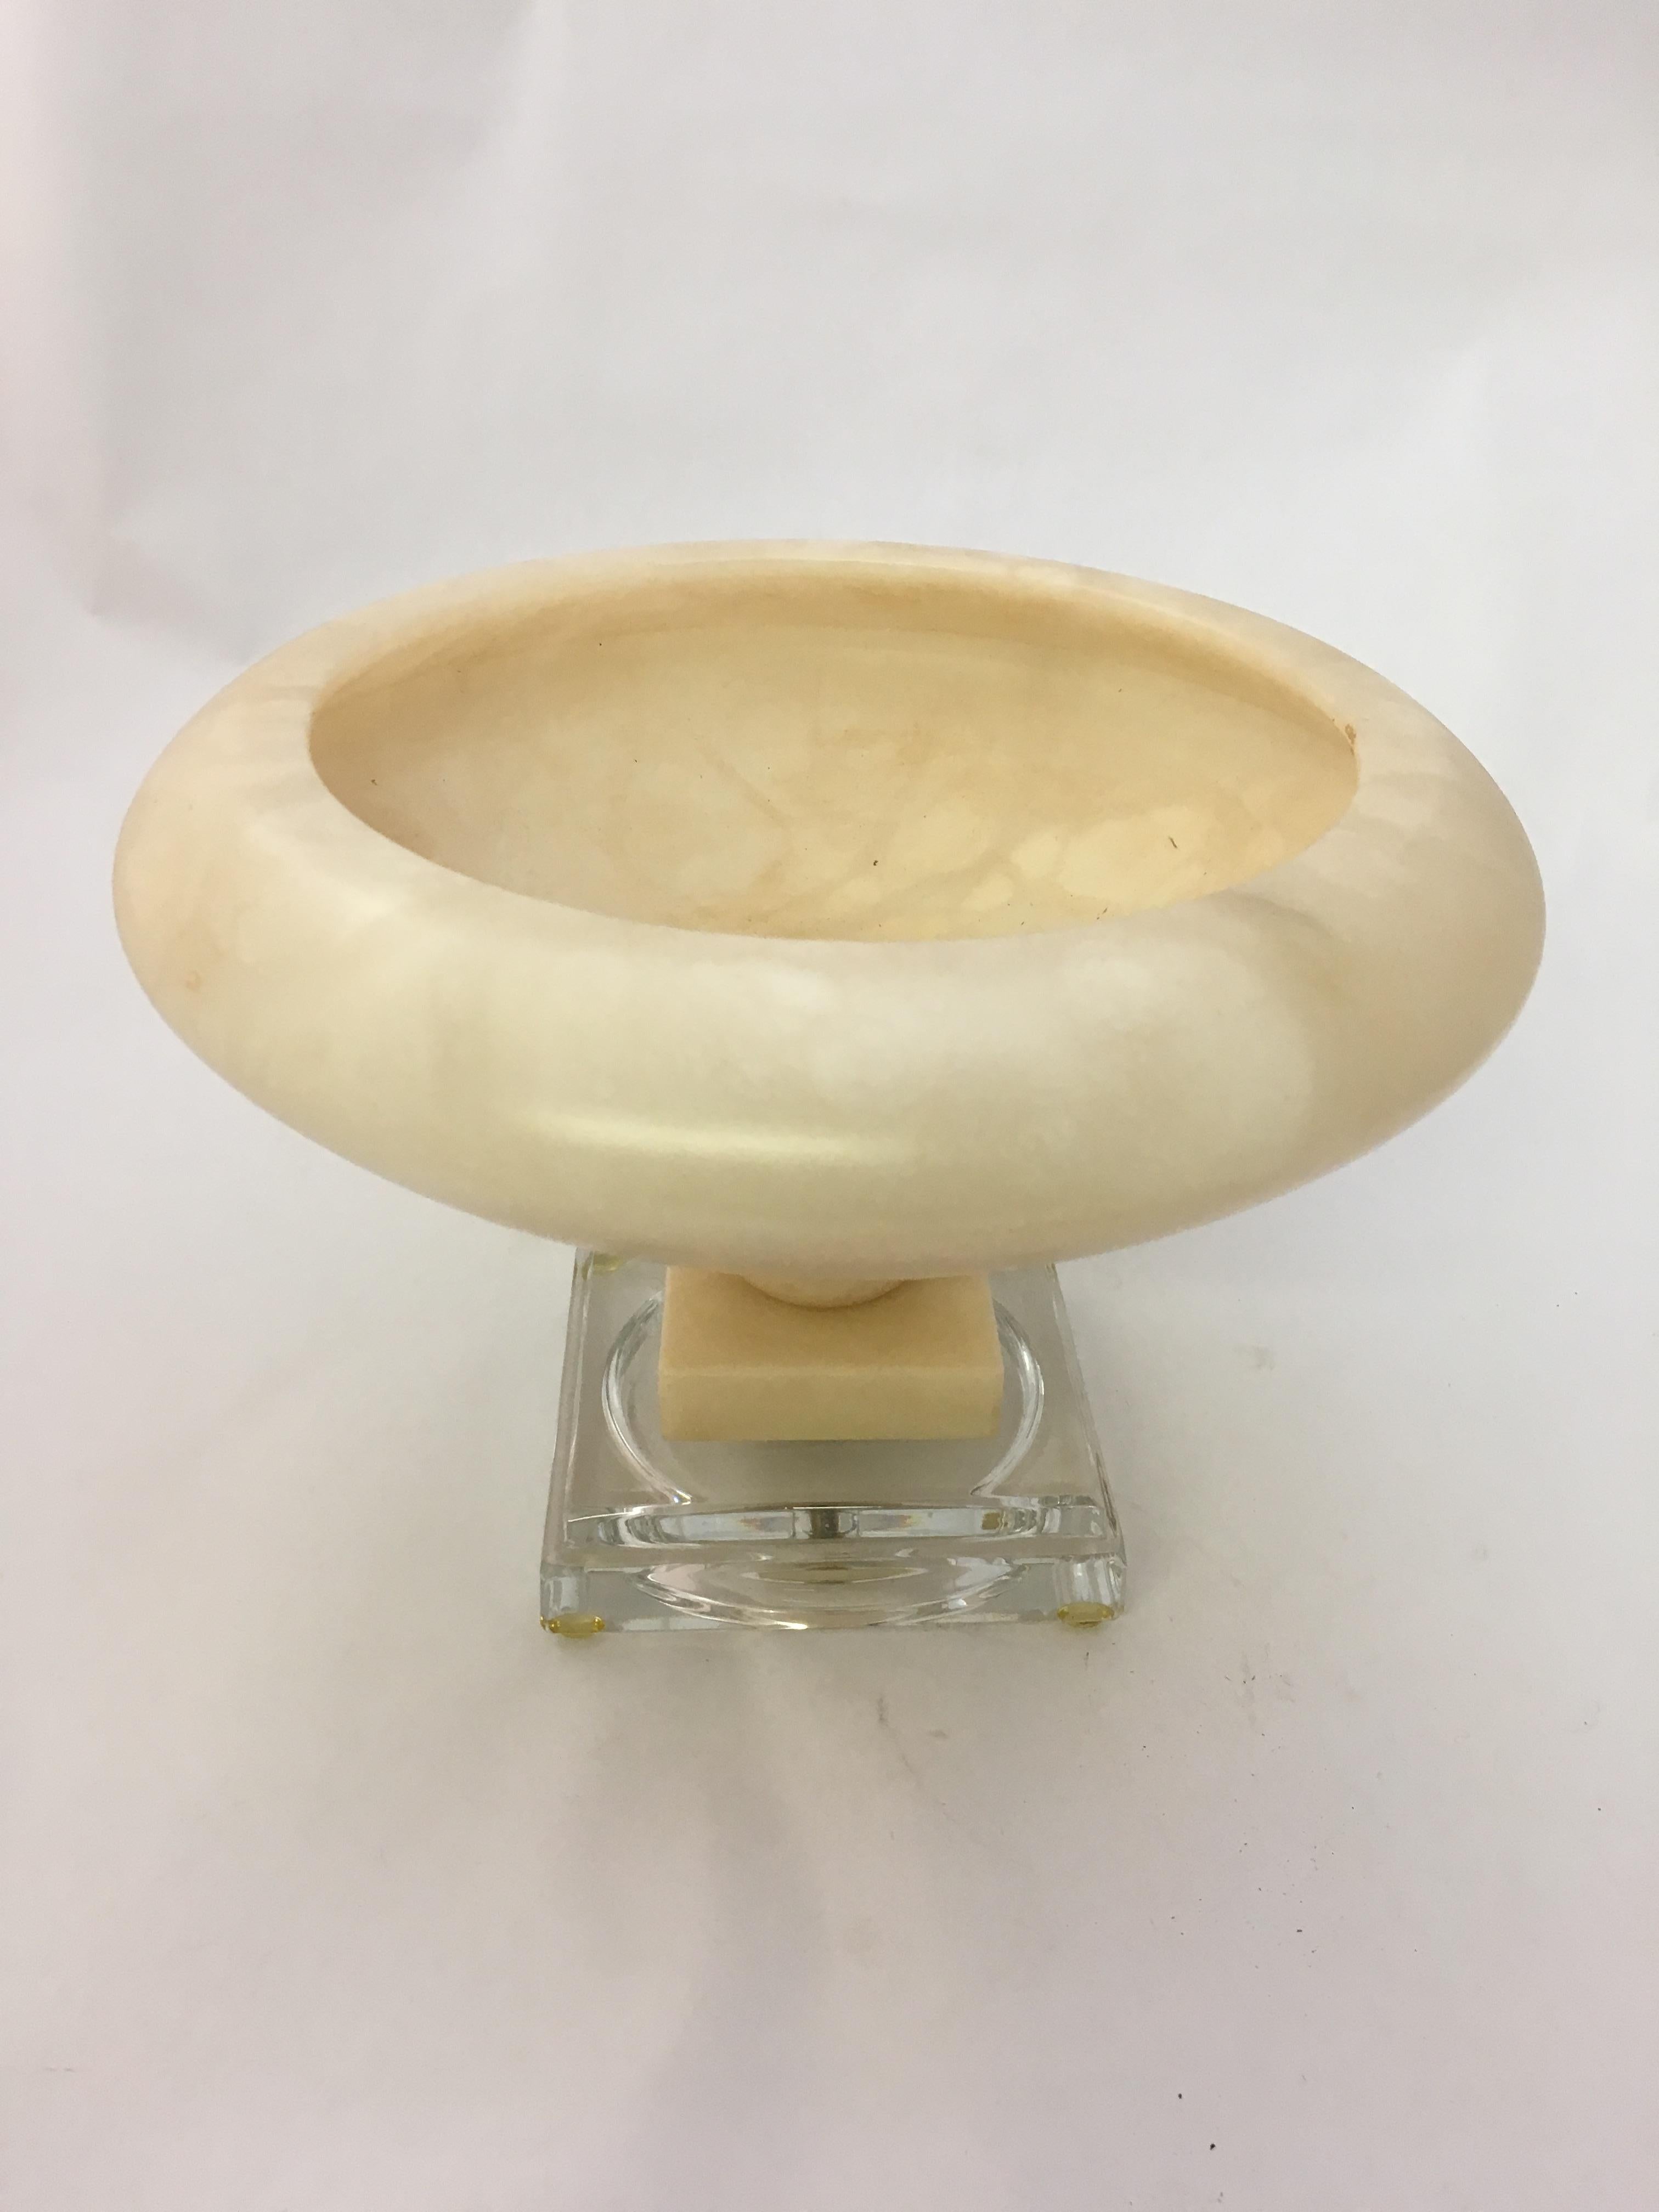 Polished alabaster with a clear Lucite base, circa 1980. A beautiful decorative object. Very good condition.

Measures: 10.5